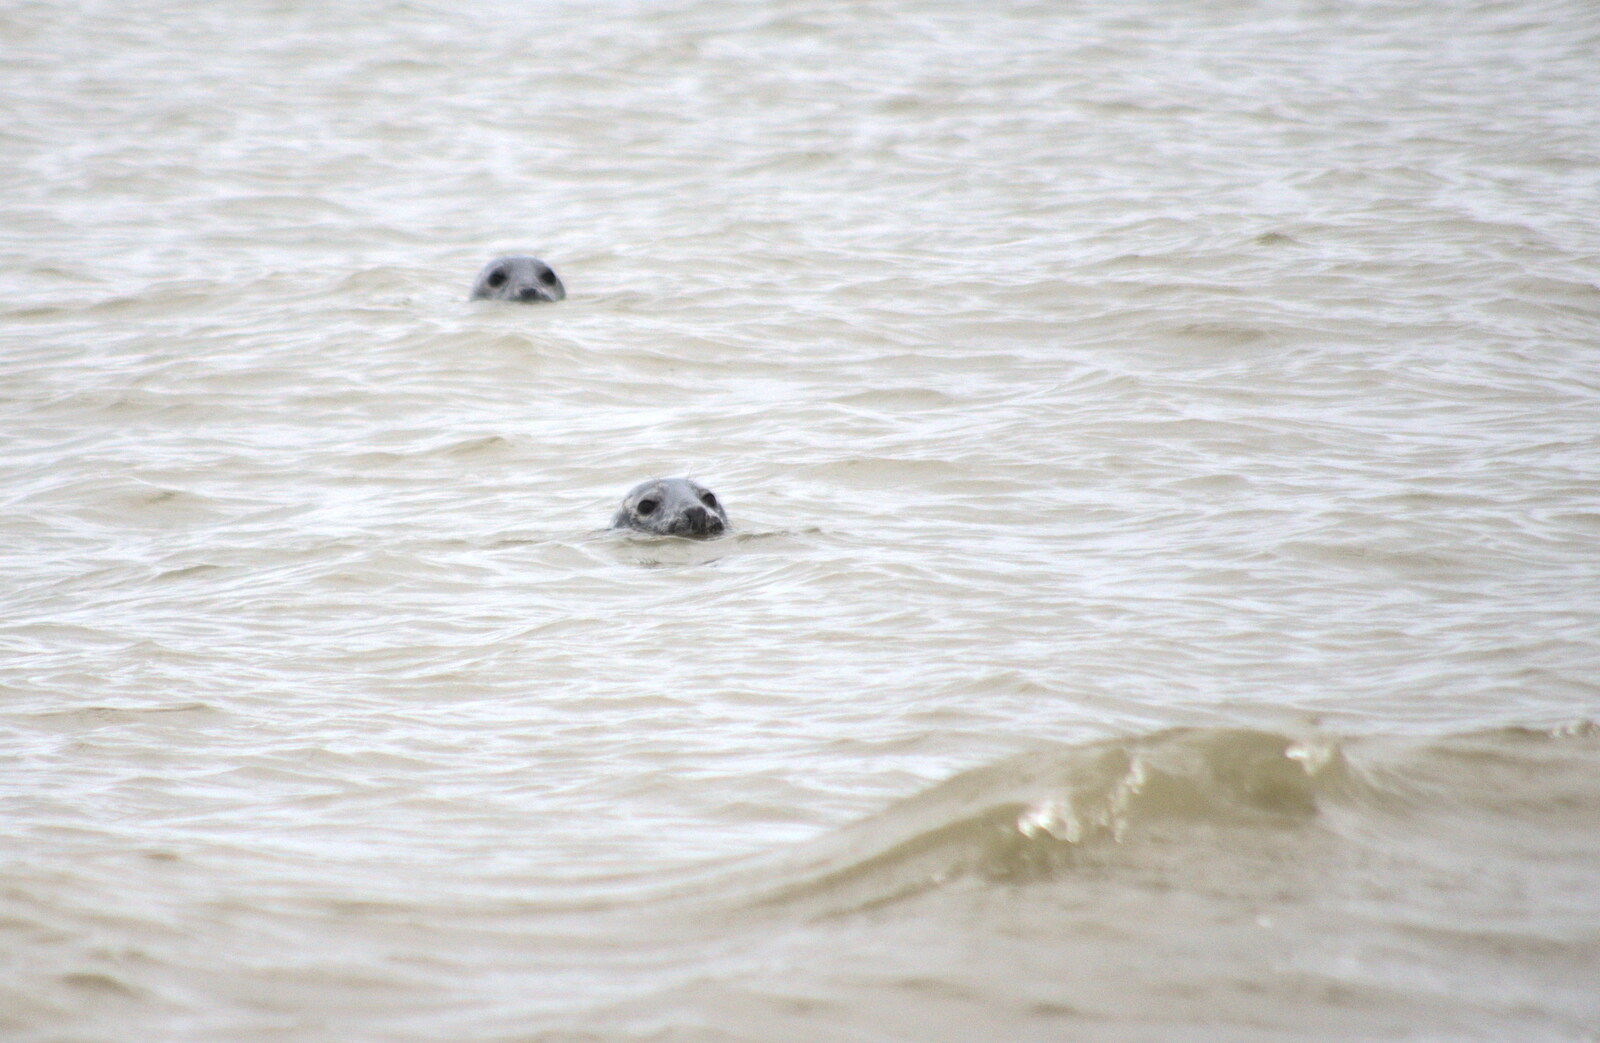 A pair of seals bob around in the sea from A Wet Weekend of Camping, Waxham Sands, Norfolk - 13th June 2015